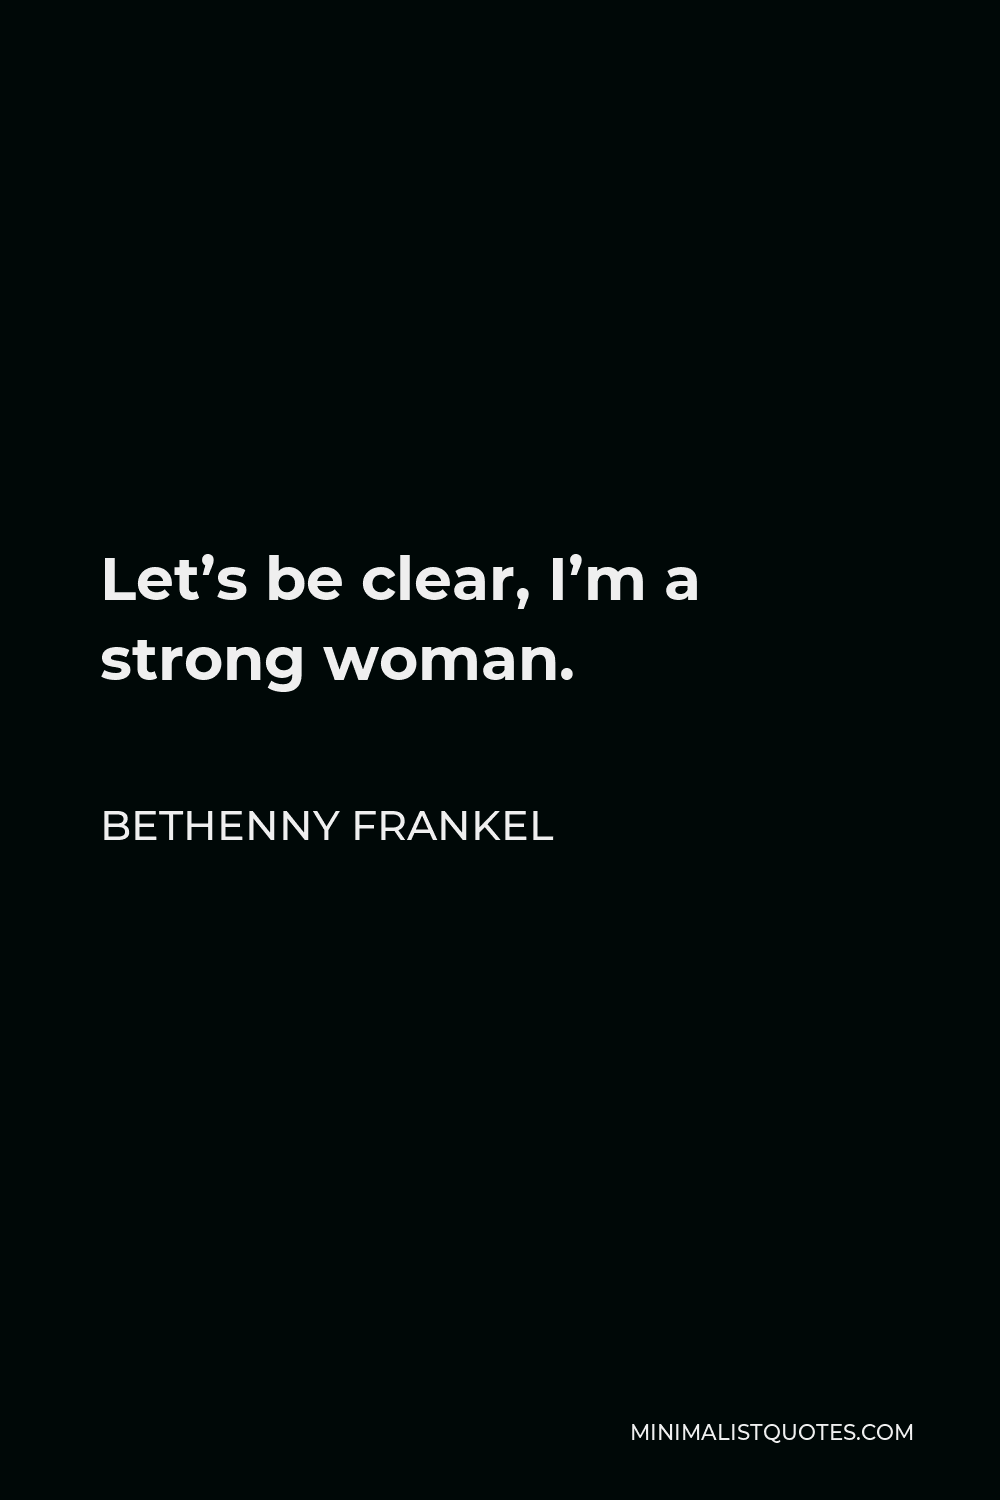 Bethenny Frankel Quote - Let’s be clear, I’m a strong woman.